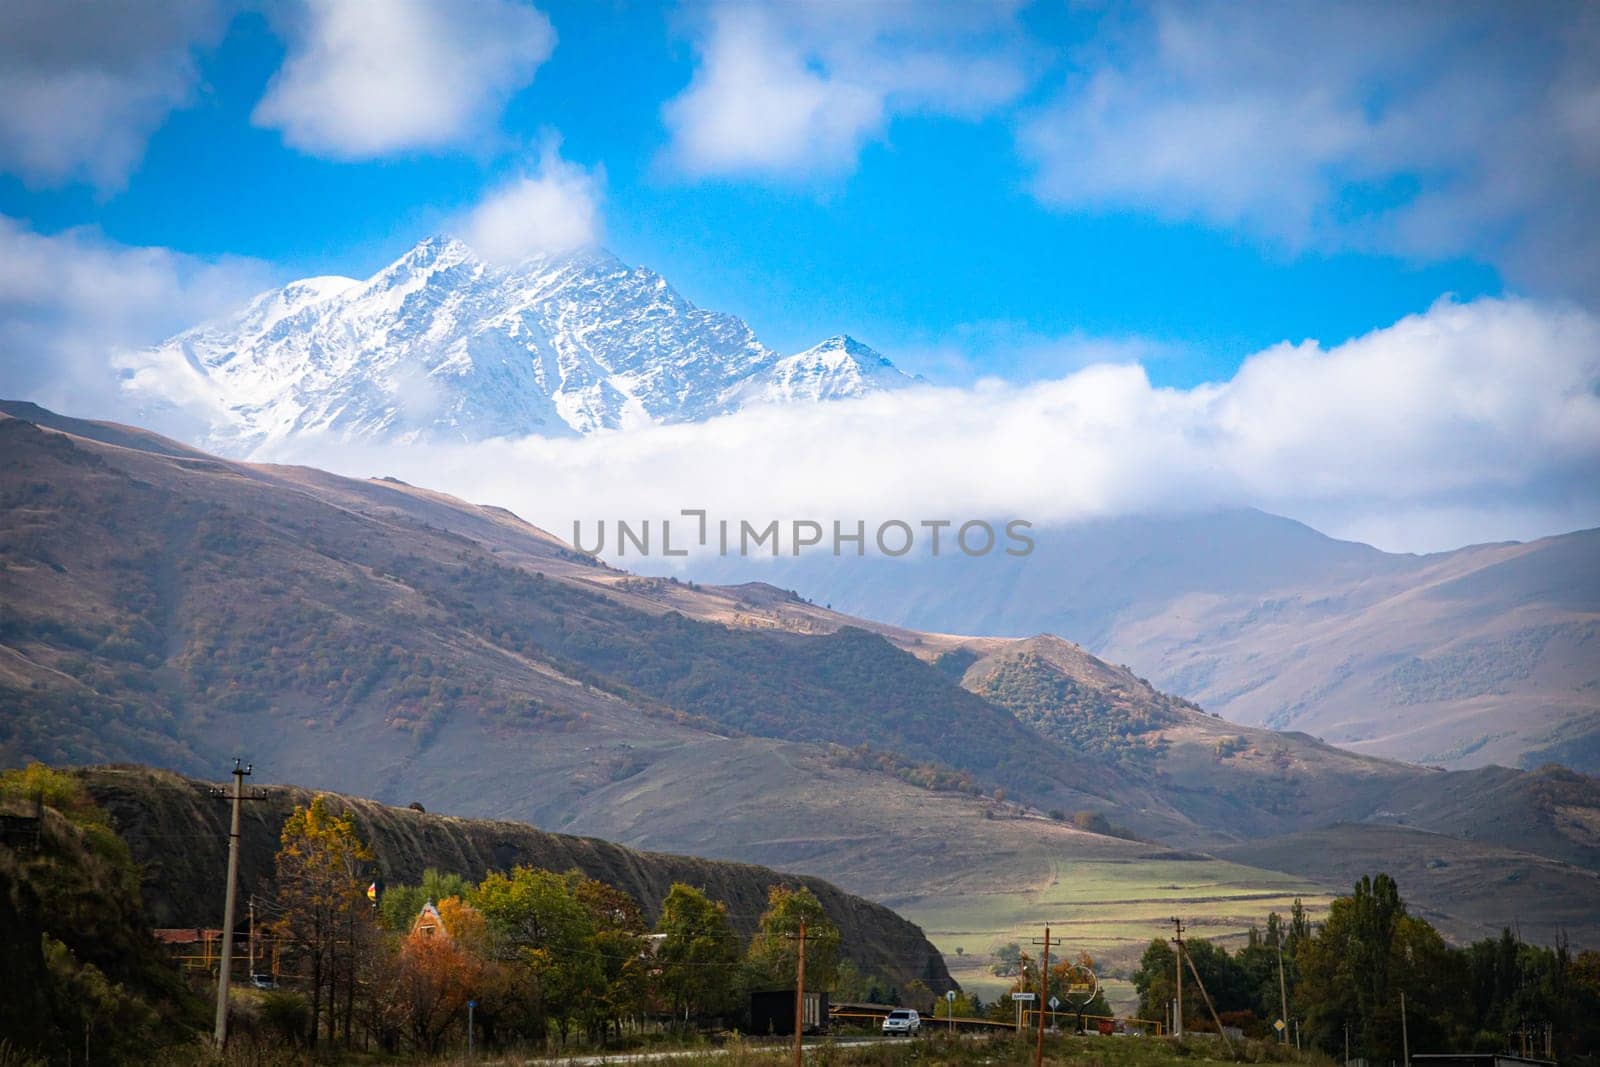 An amazing view of the snow-capped top of the mountain with a beautiful surrounding landscape, embodying the wondrous nature of the northern regions